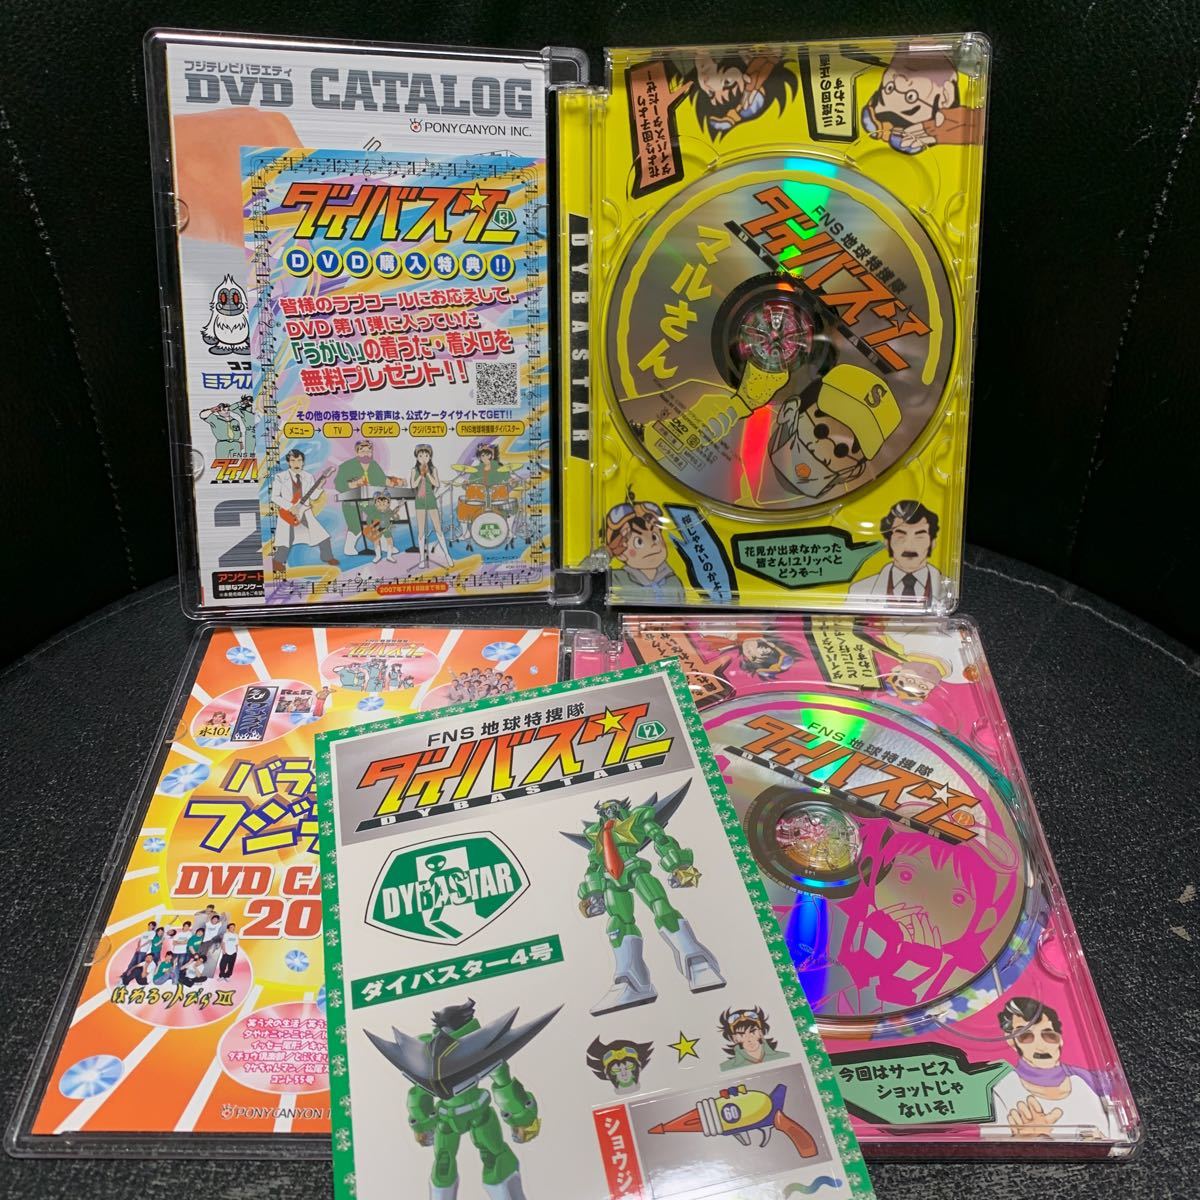  Fuji tv FNS the earth Special .. large Buster DVD 2,3 2 pieces set 